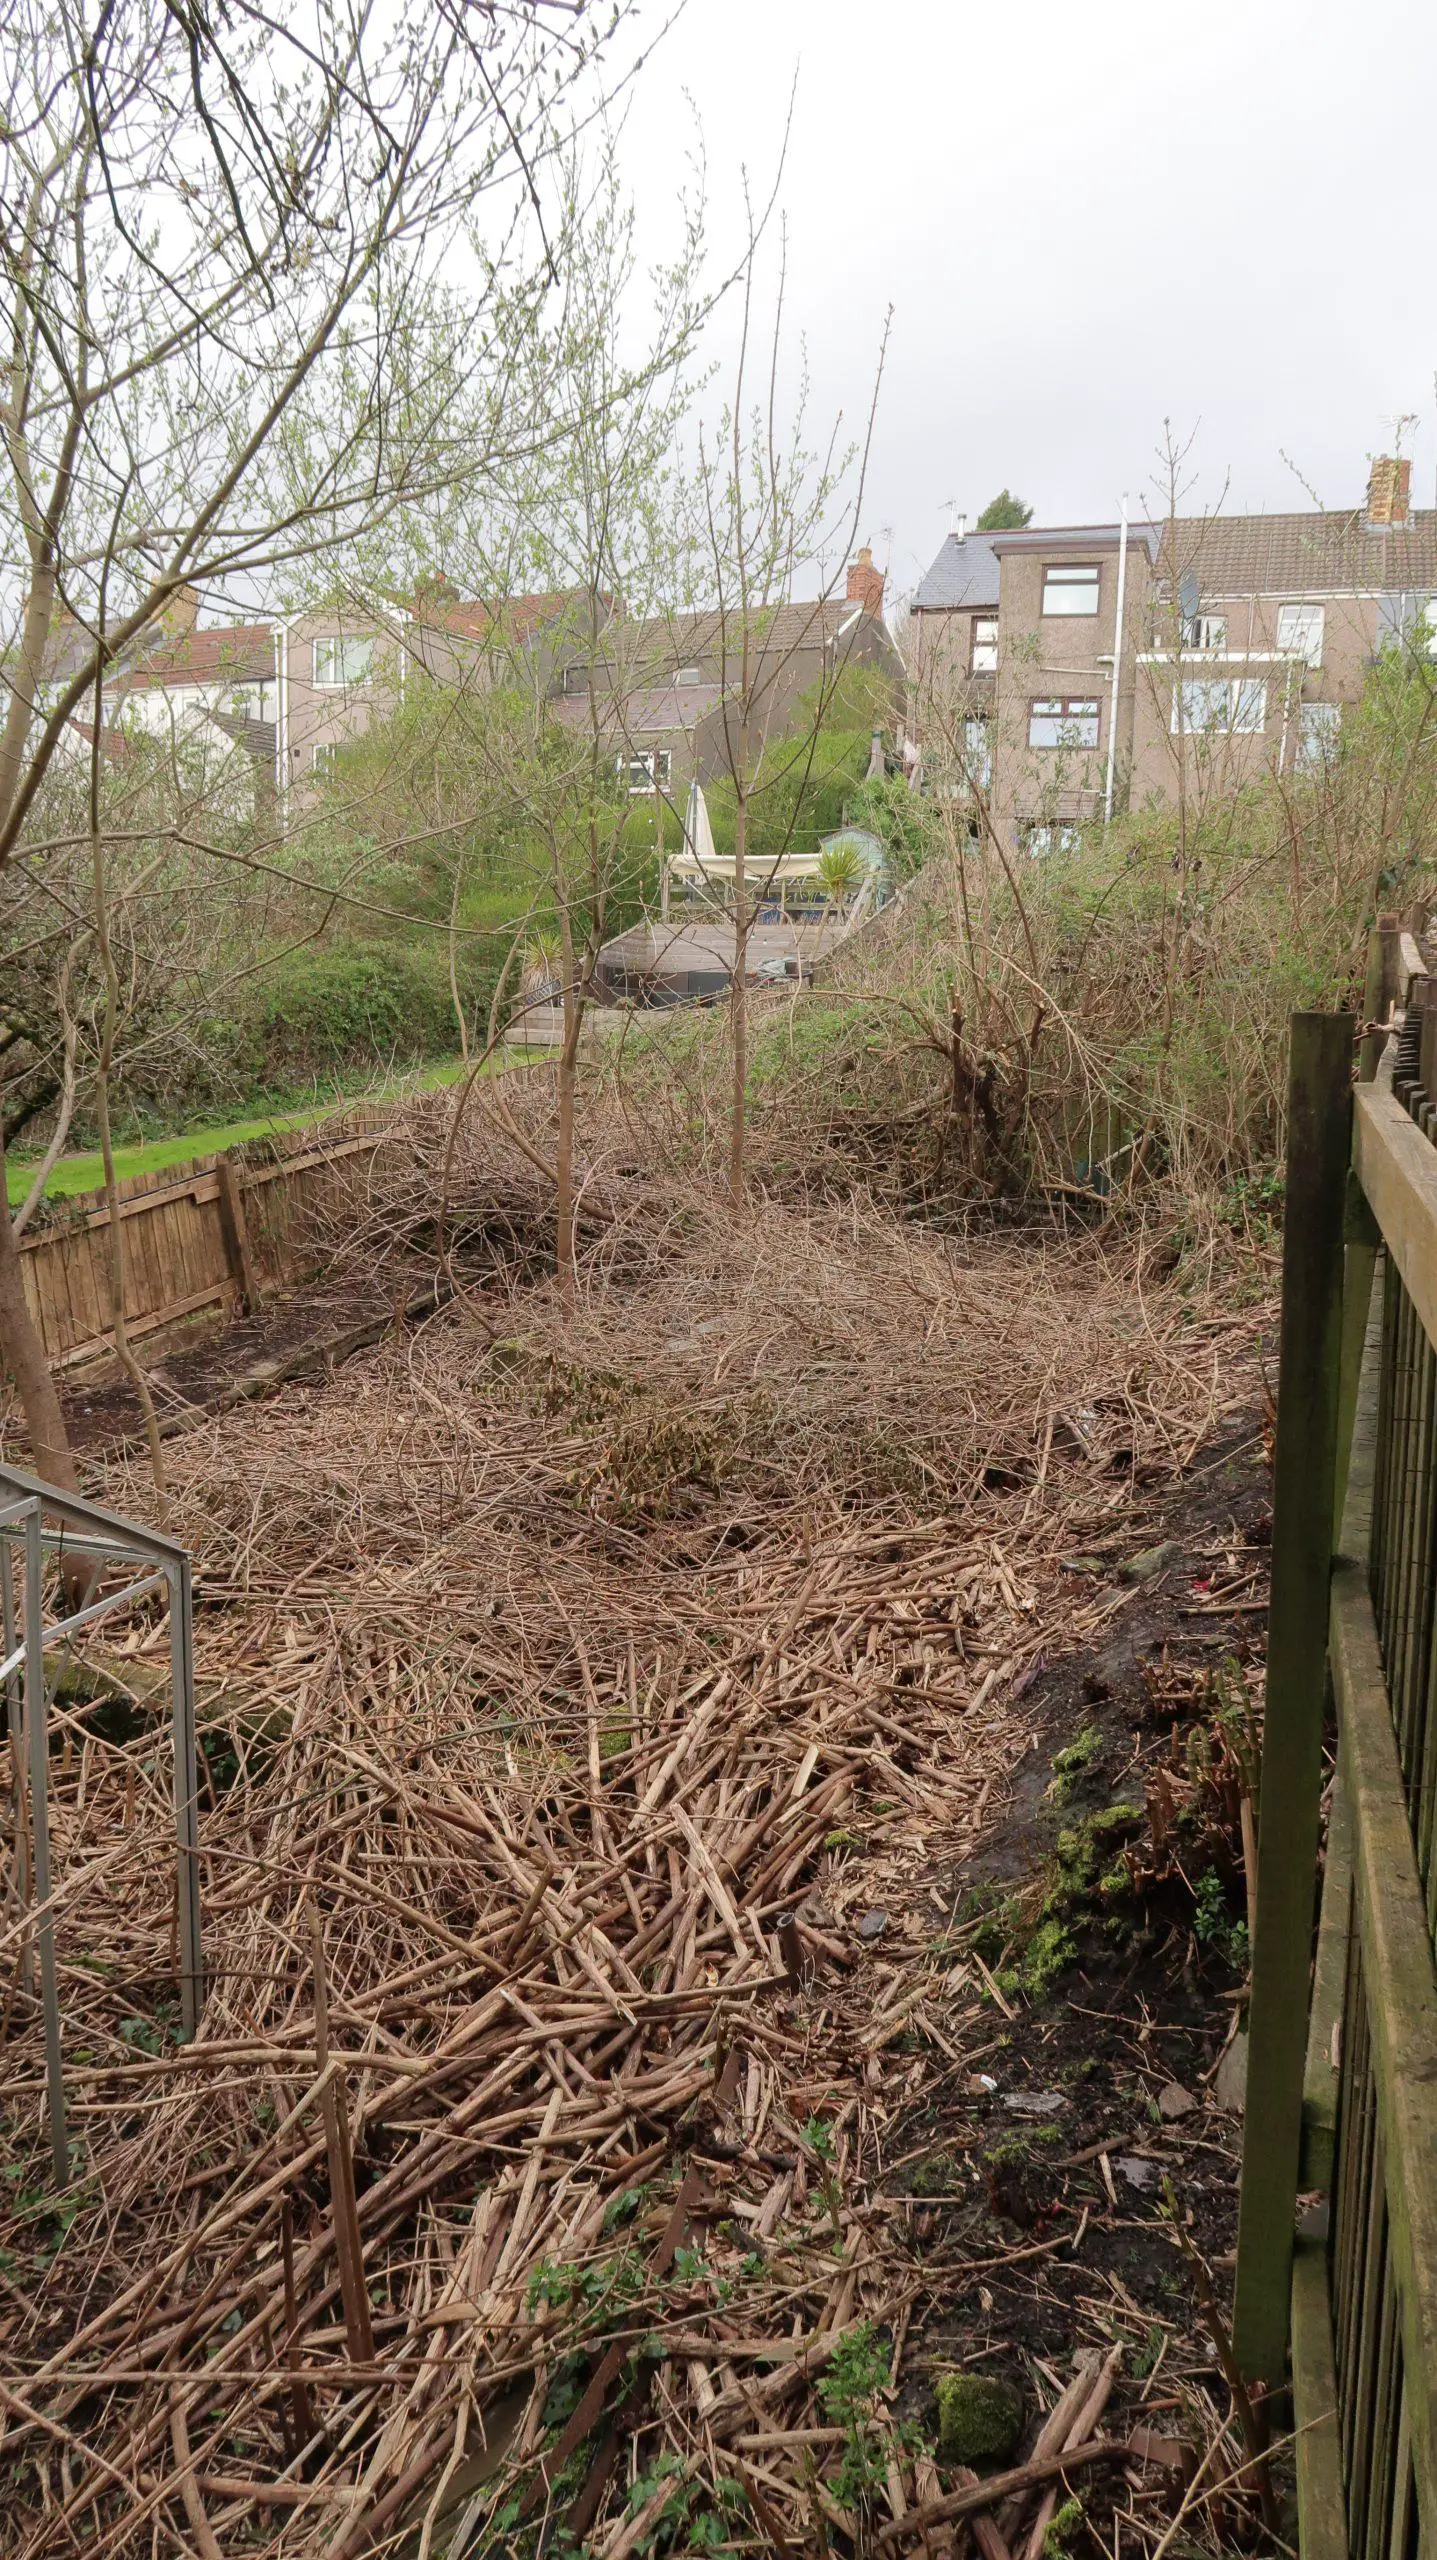 Clearing of a site can be costly the larger the area and the more intrusive the invasive weeds are